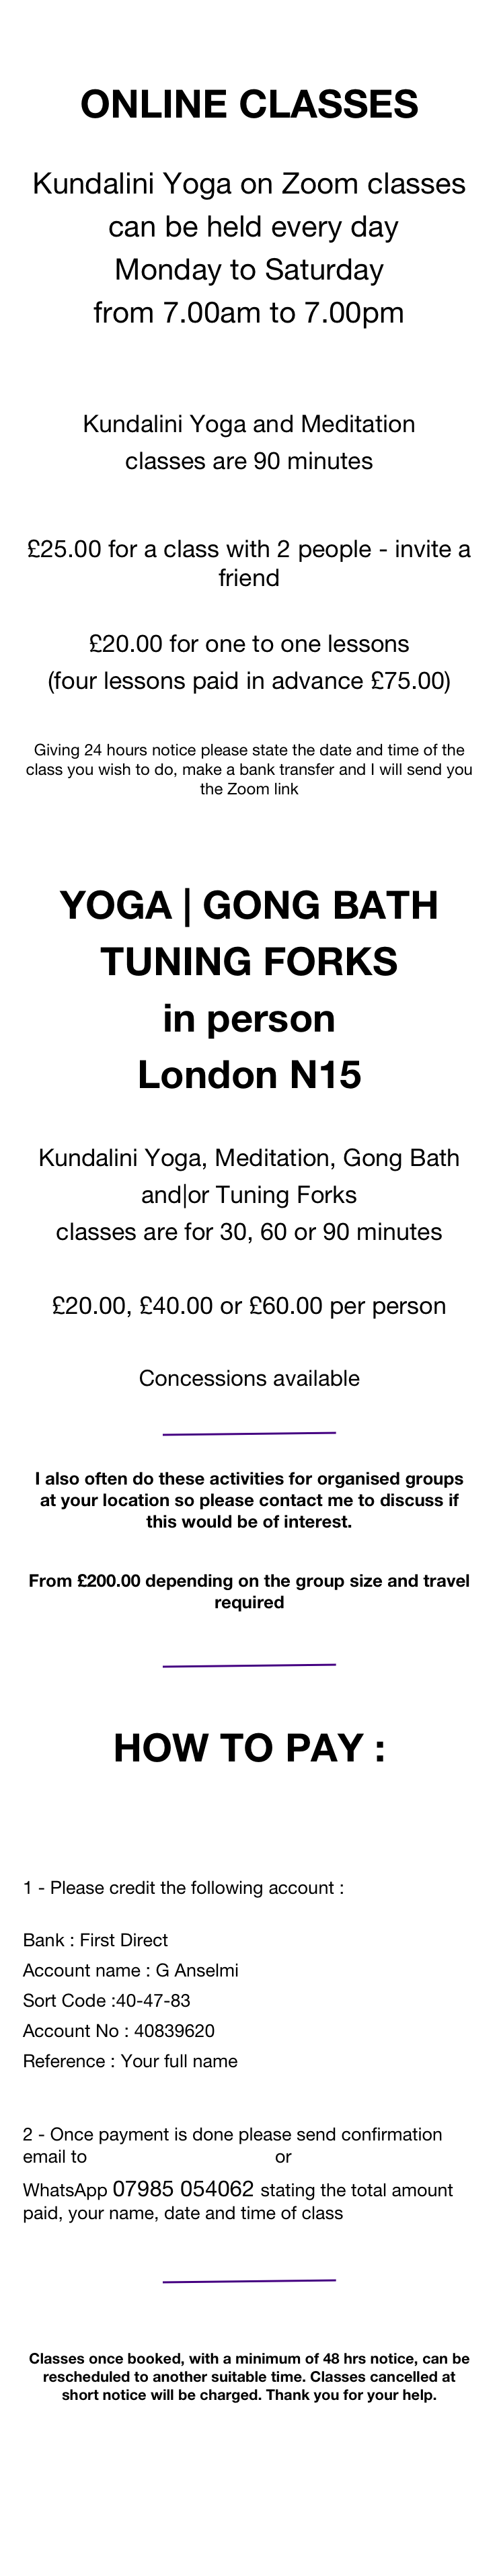 

ONLINE CLASSES:



Kundalini Yoga on Zoom classes
 can be held every day 
Monday to Saturday
from 8 am to 7.30 pm 

Kundalini Yoga and Meditation
classes are from 30 to 90 minutes
 
£10 per person
Five lessons £45 to be used in a month
 £15 for one to one lessons

Concessions available please email Siri Atma


Giving 24 hours notice please state the date and time of the class you wish to do, make a bank transfer and we will send you the Zoom link
 
￼
  
HOW TO PAY and BOOK the class :


Scan the code with 
the PayPal app on your
smartphone and 
follow the step to pay.
Only for people live out UK









Second options for UK:

1 - Please credit the following account : 
Bank : First Direct
Account name : G Anselmi
Sort Code :40-47-83
Account No : 40839620
Reference : Your full name  
2 - Once payment is done please send confirmation email to siriatmas@yahoo.com with following details: 

Total amount paid : £ .............. name : ..................... 
date of class : ............   and time ........  
 
￼


Please : class once booked cannot be cancelled, with minimum of 48 hrs notice can be rescheduled to another suitable time. Can be rescheduled once only. Thank you for your help.
 


